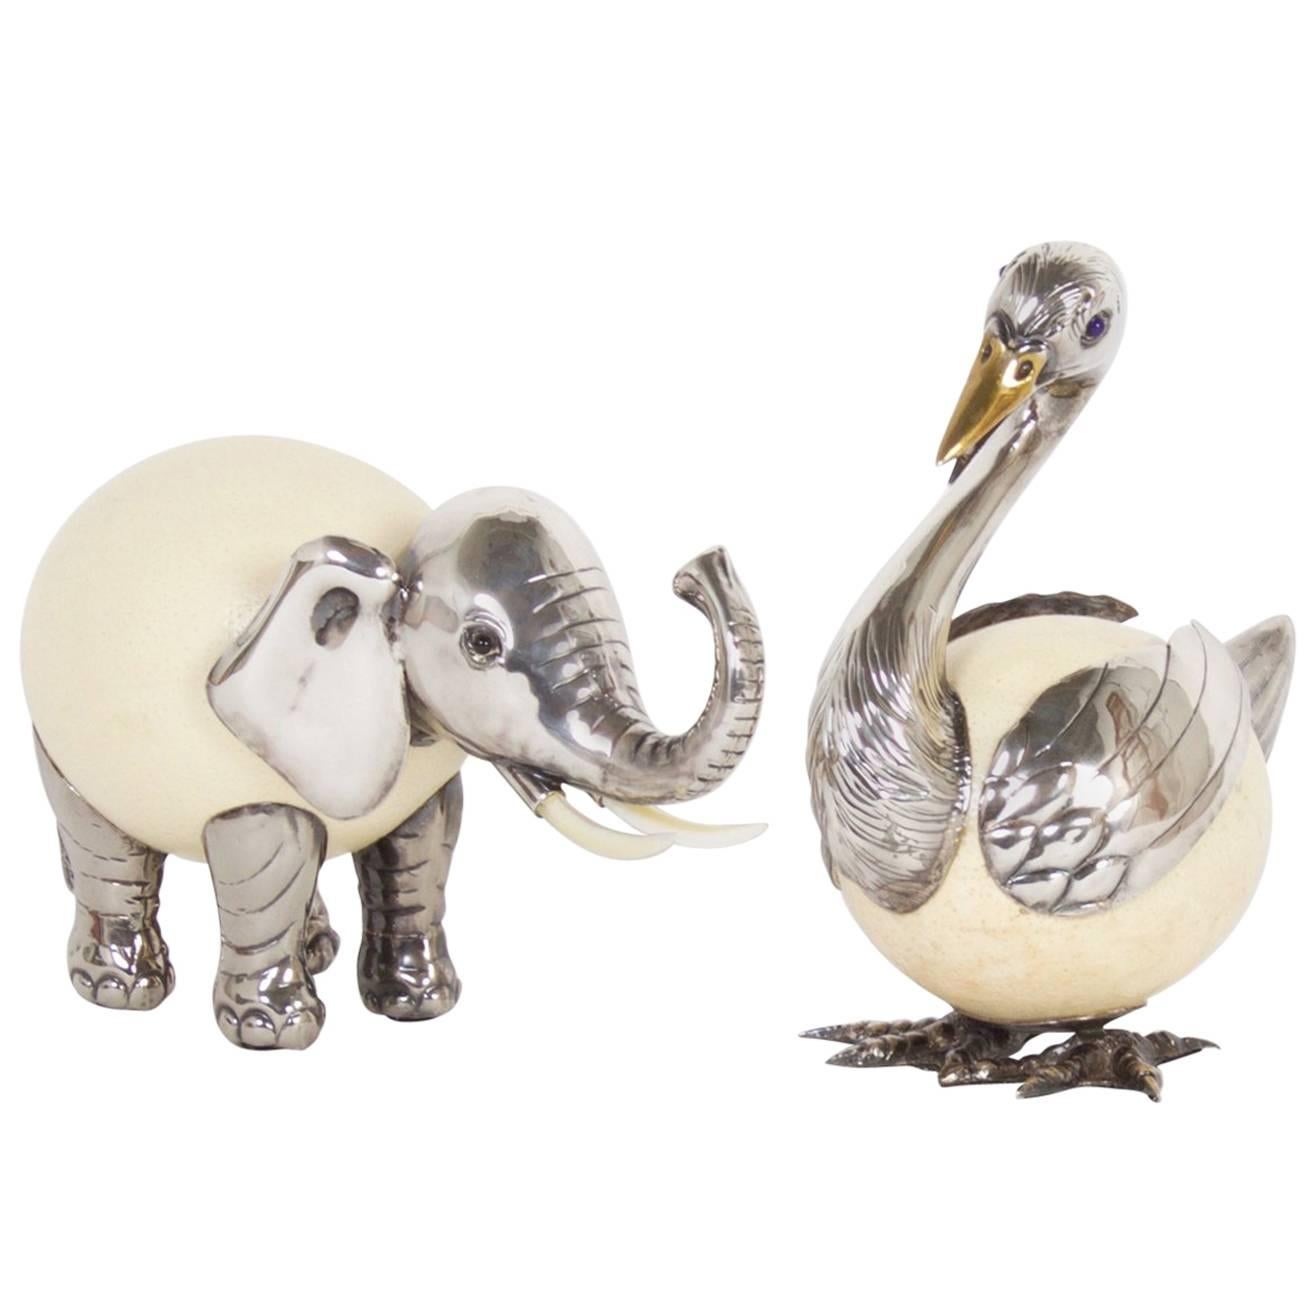 Pair of Binazzi Silvered Metal Animal Sculptures, Priced Individually